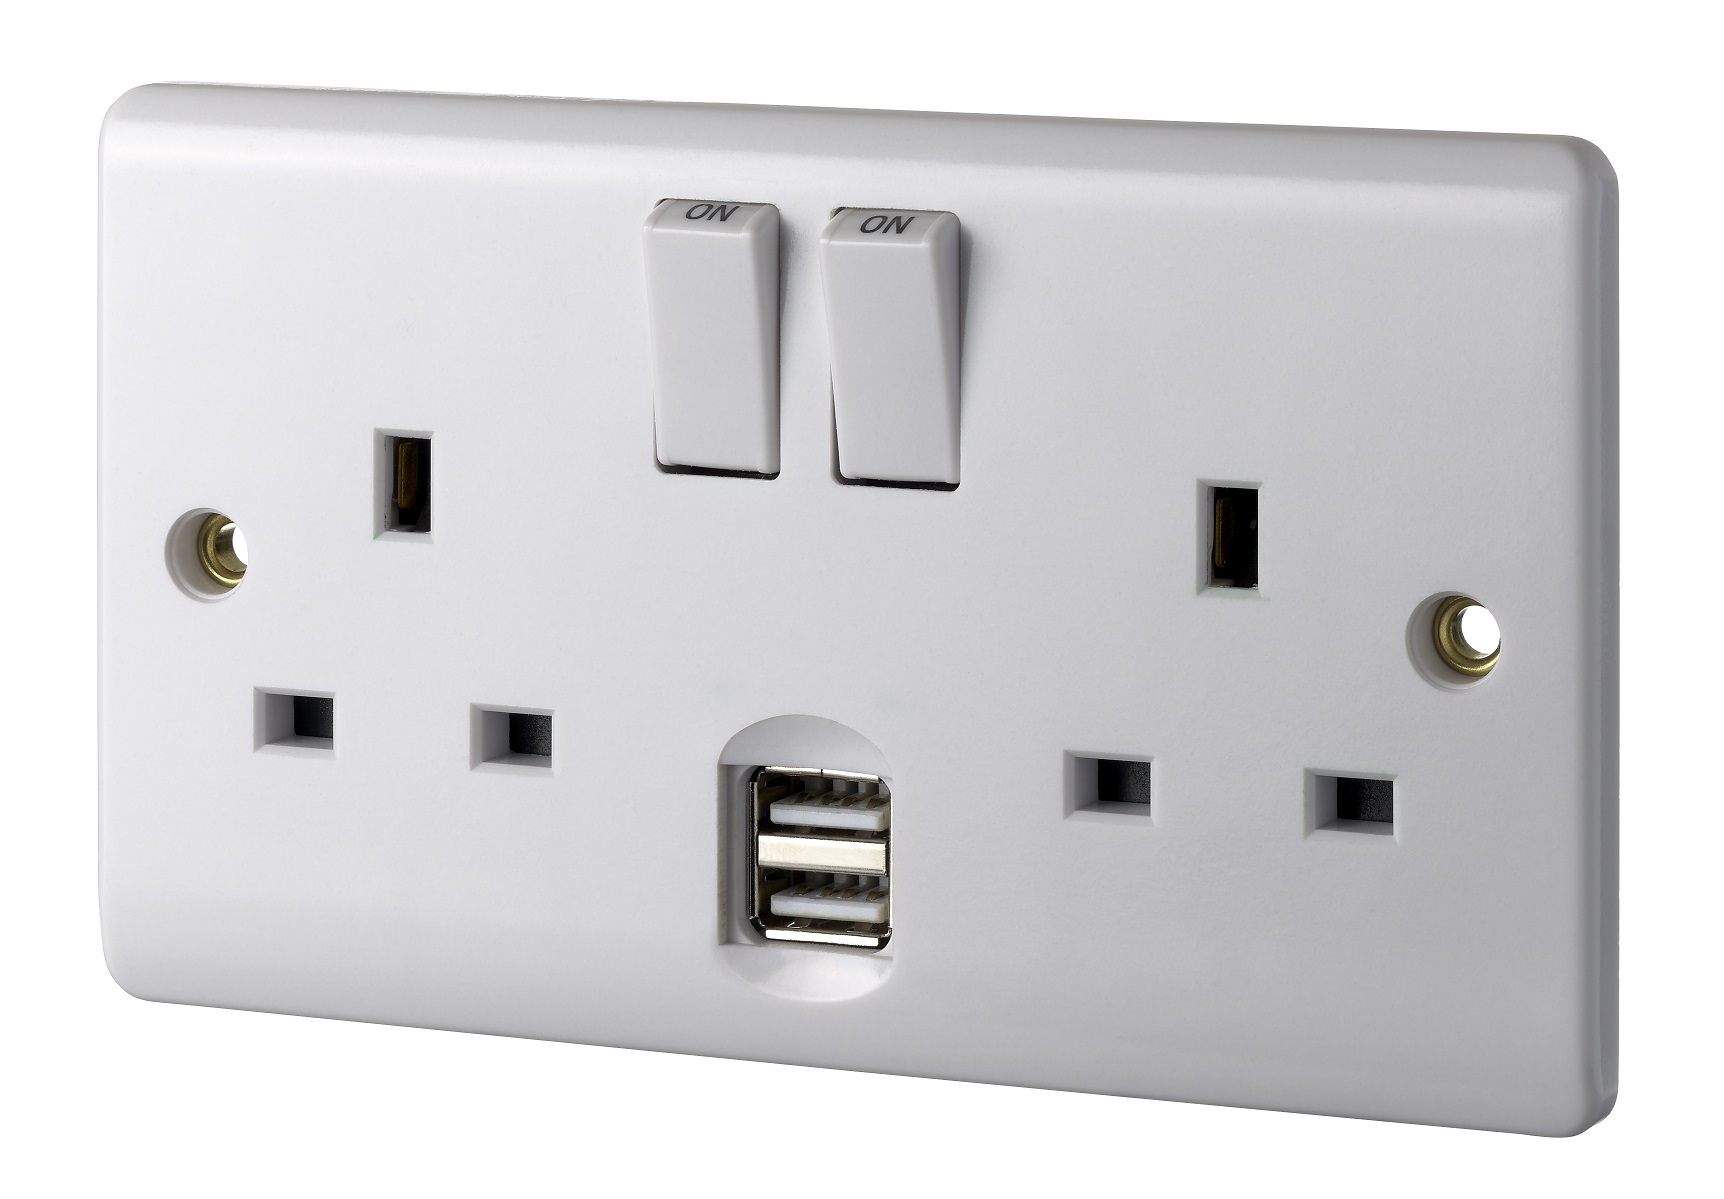 Double Wall Socket with USB